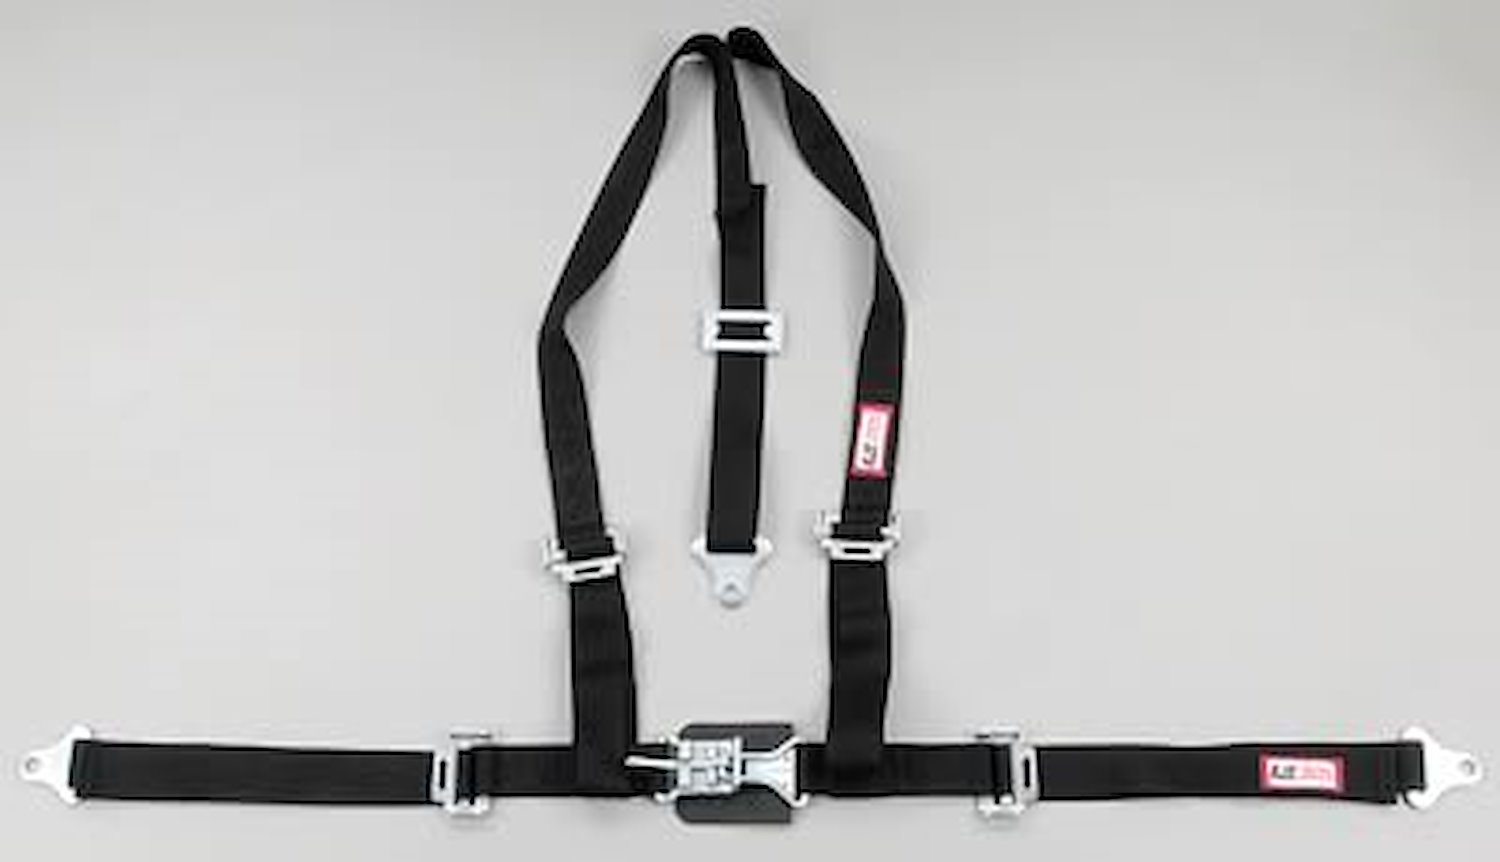 NON-SFI L&L HARNESS 2 PULL UP Lap Belt SNAP SEWN IN 2 S.H. Individual ROLL BAR Mount WRAP/SNAP GRAY